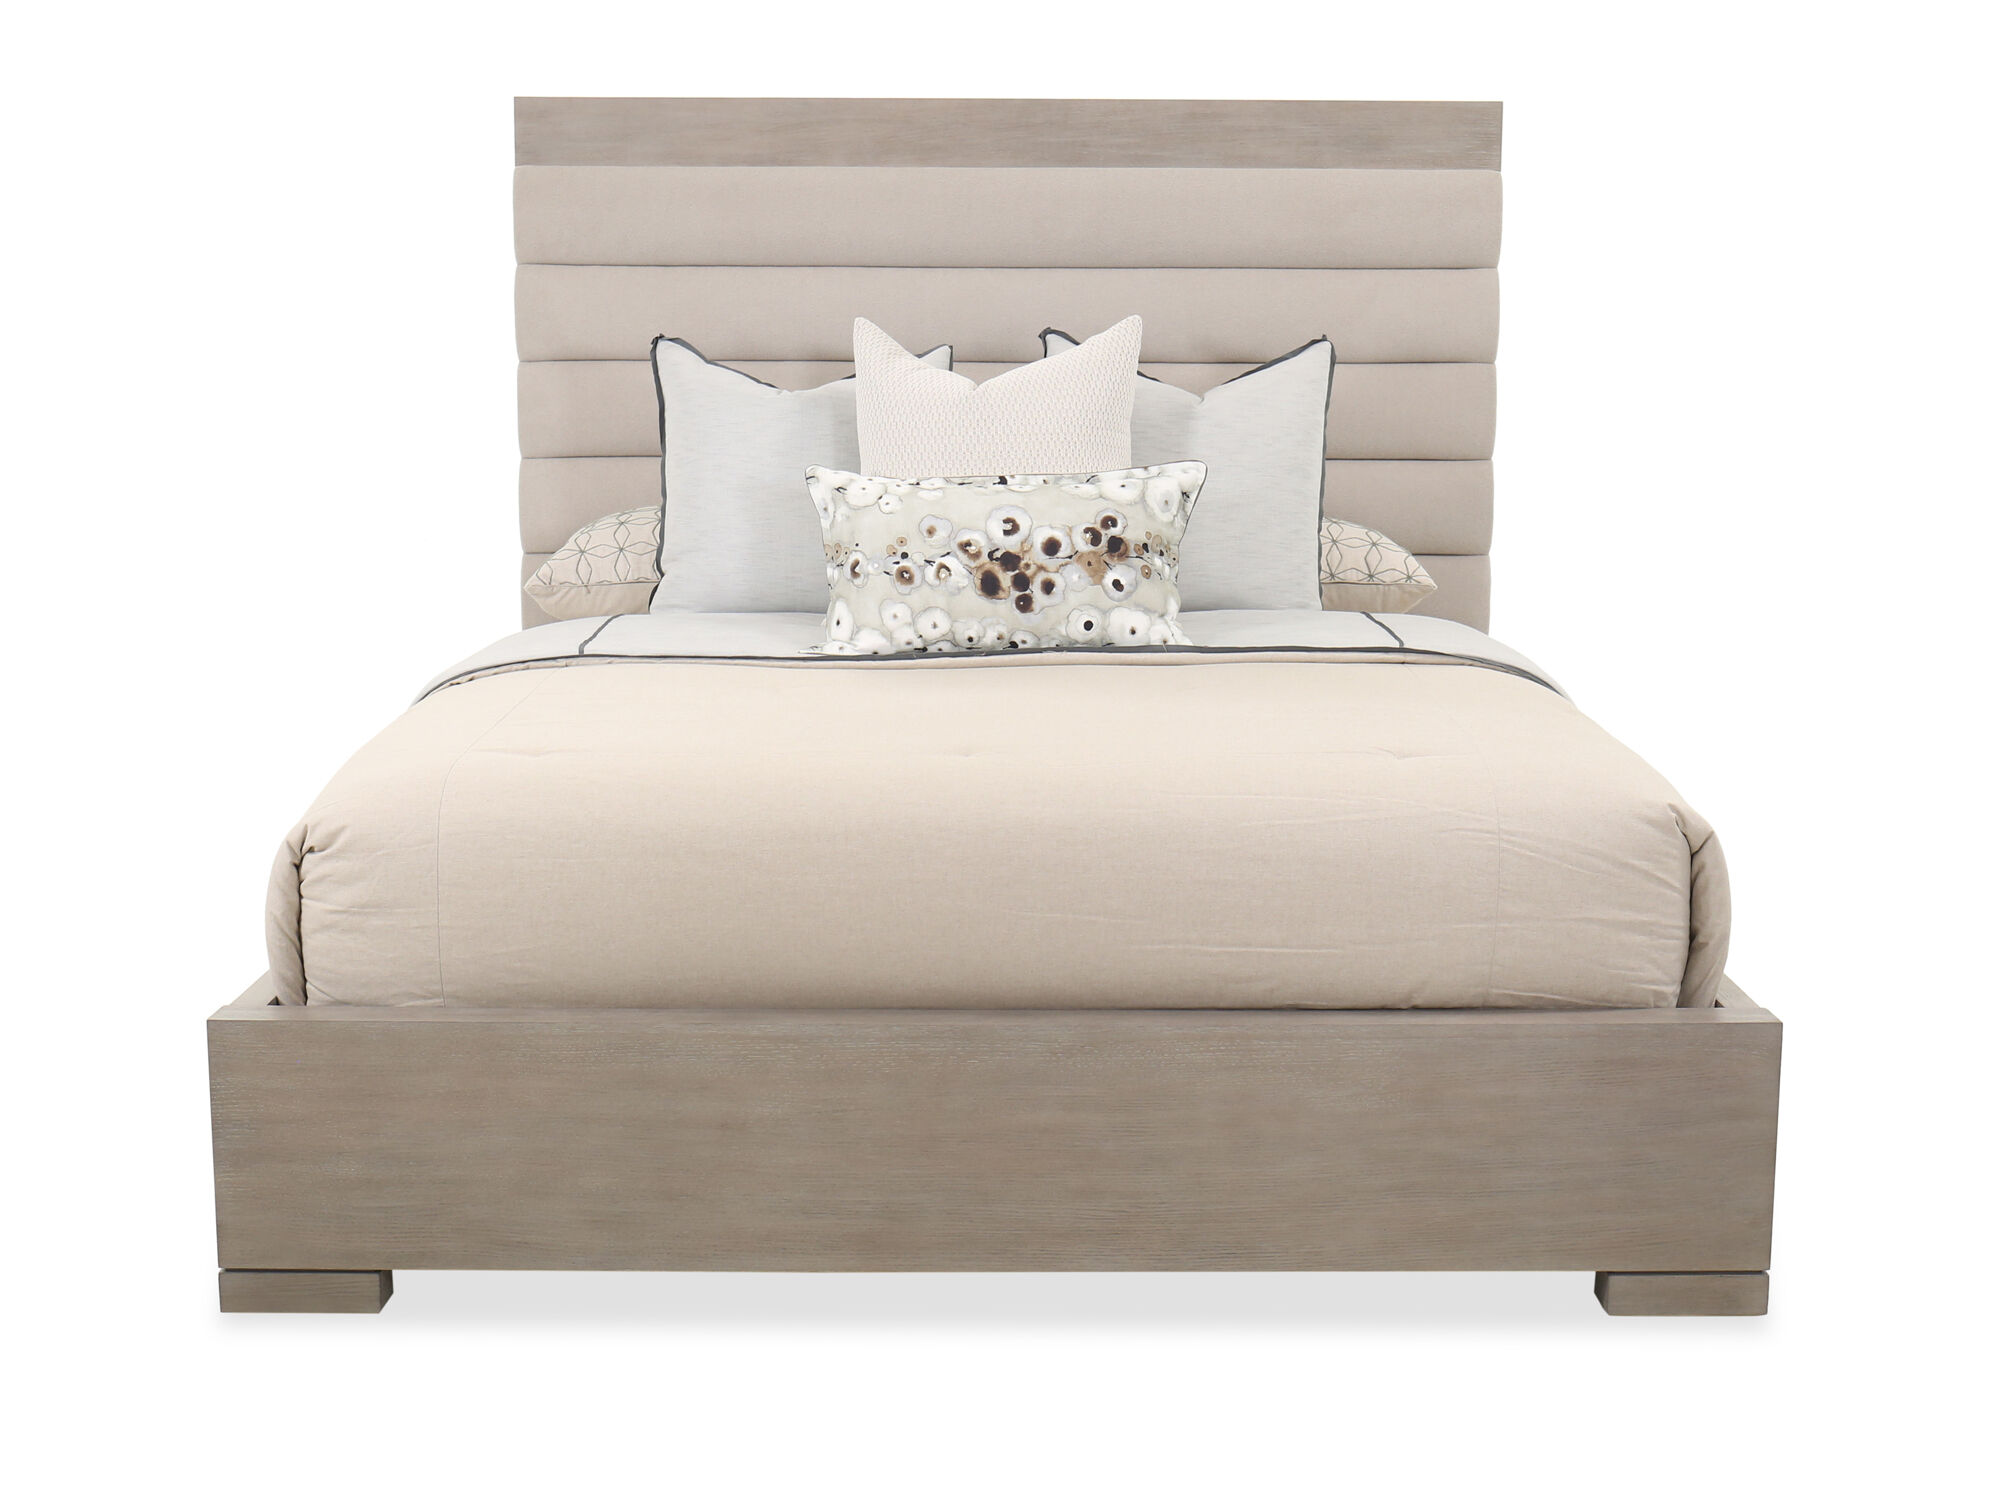 Transitional King Channel Tufted Bed, Transitional King Bed